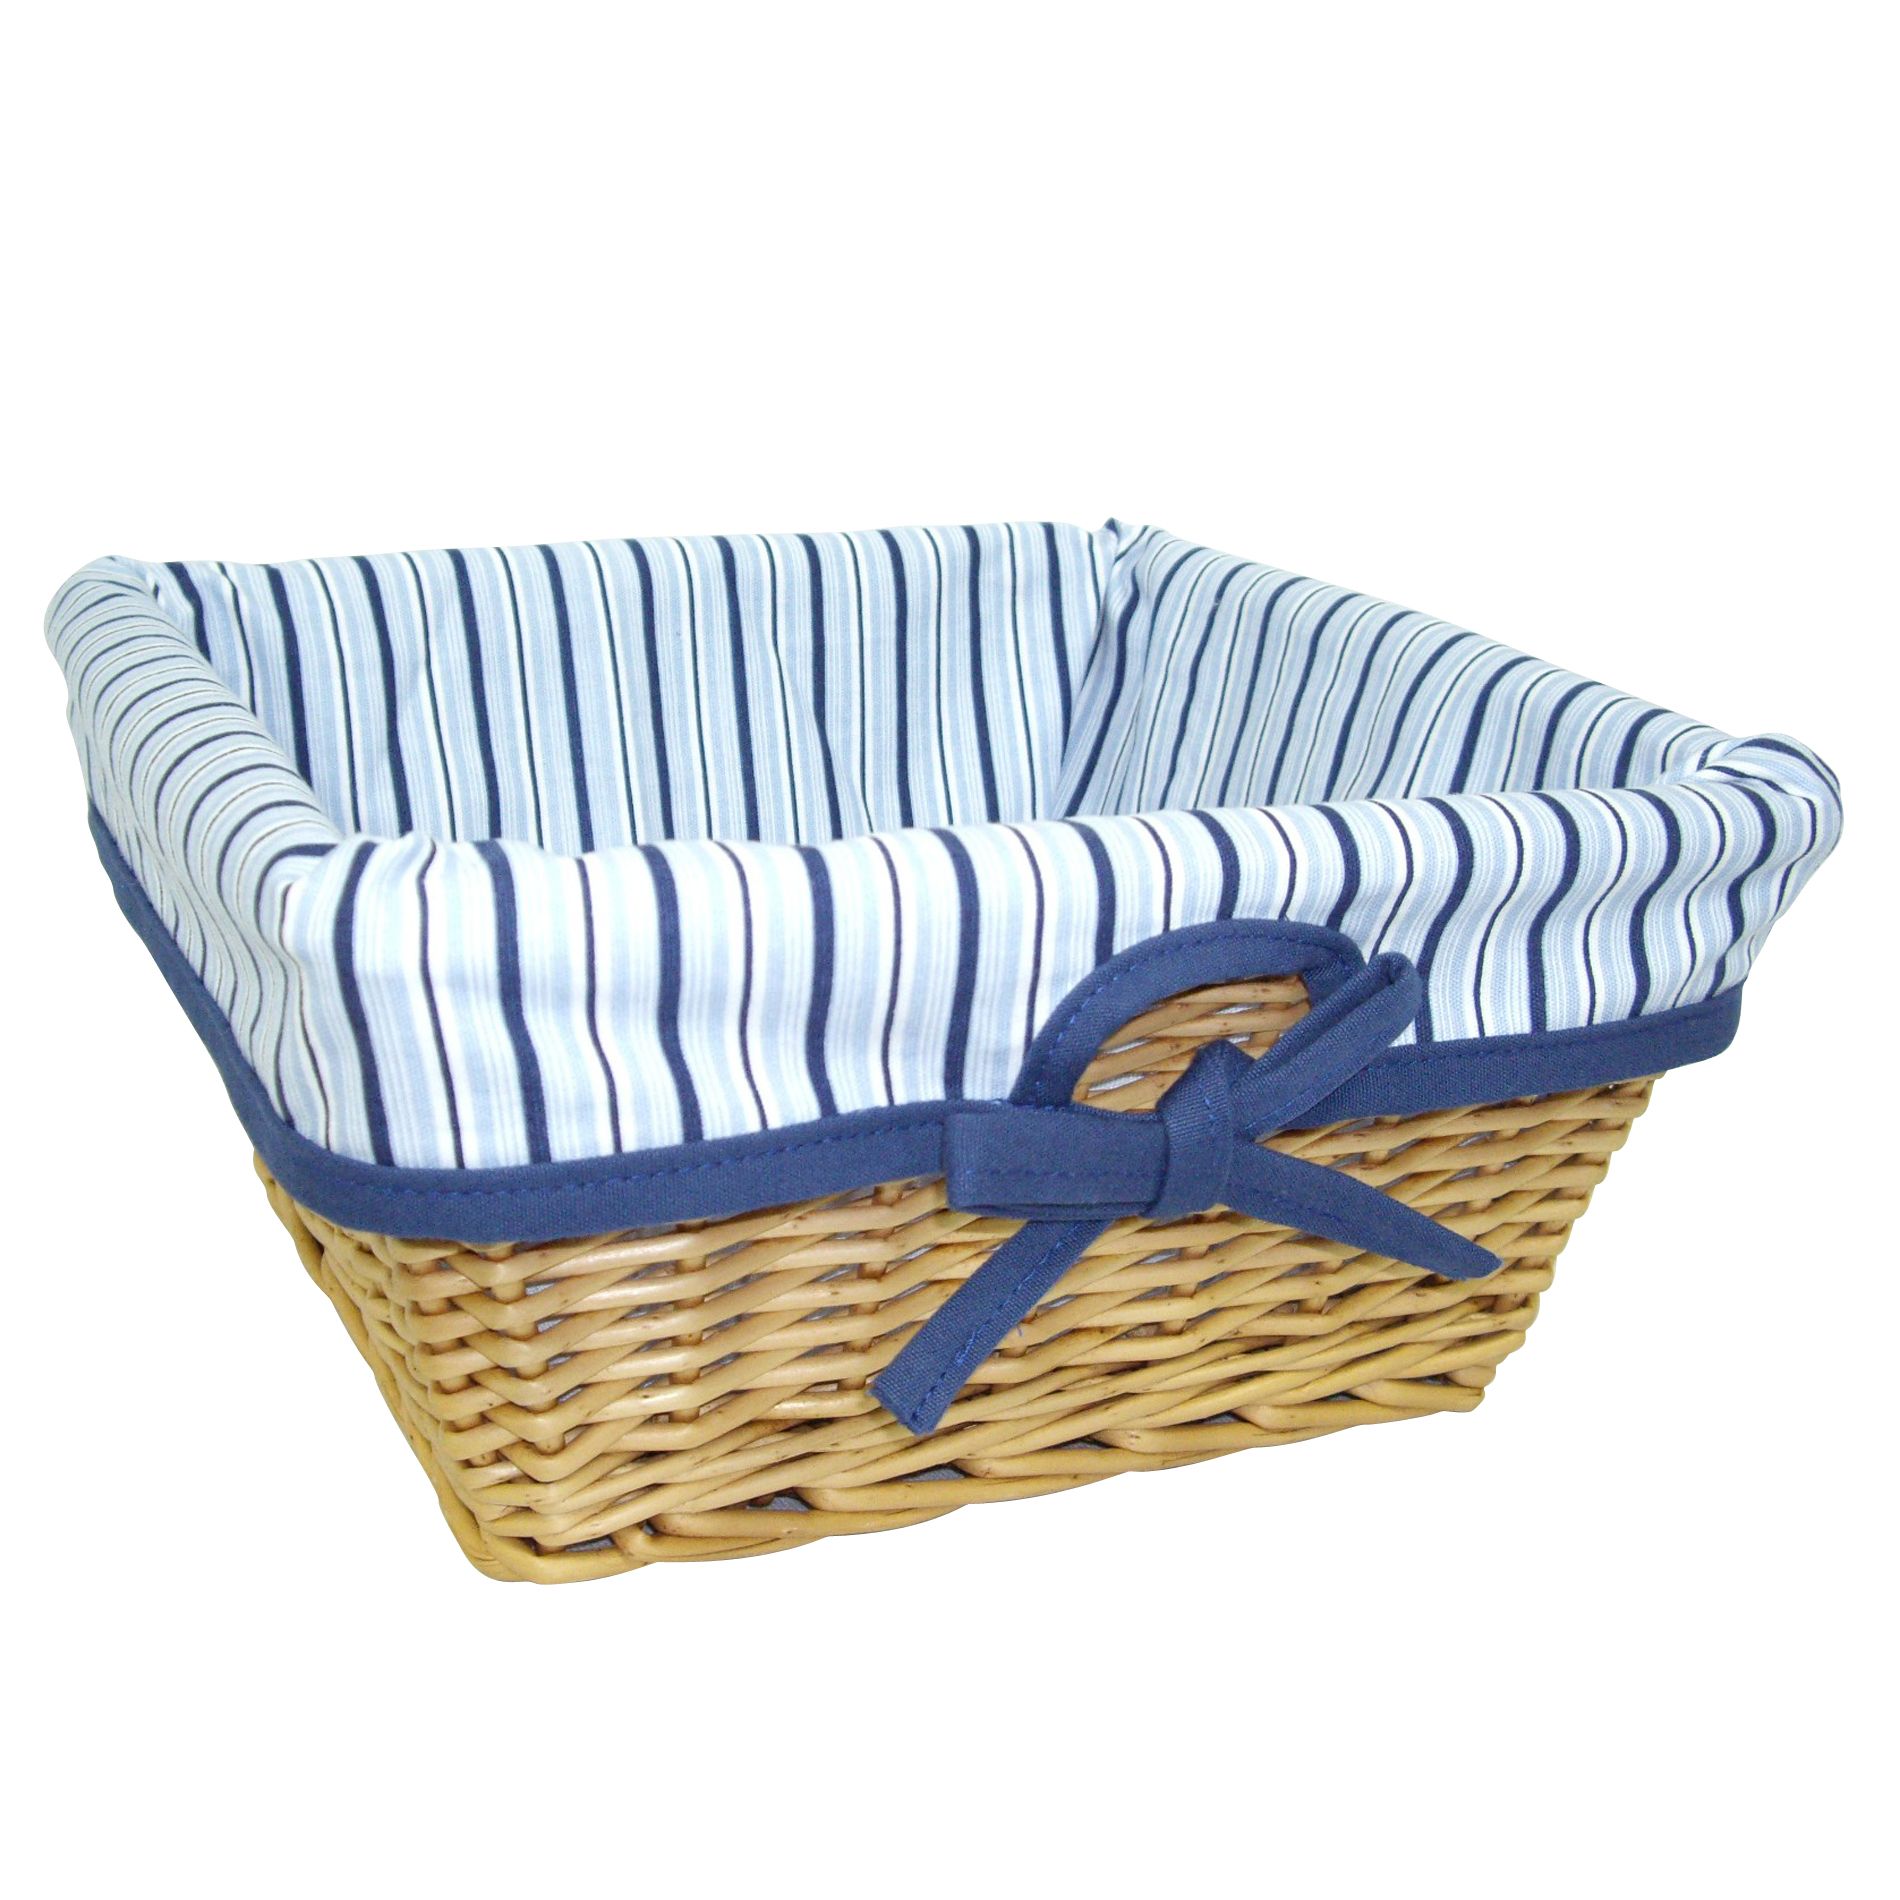 Cannon Willow Basket with Blue Striped Liner